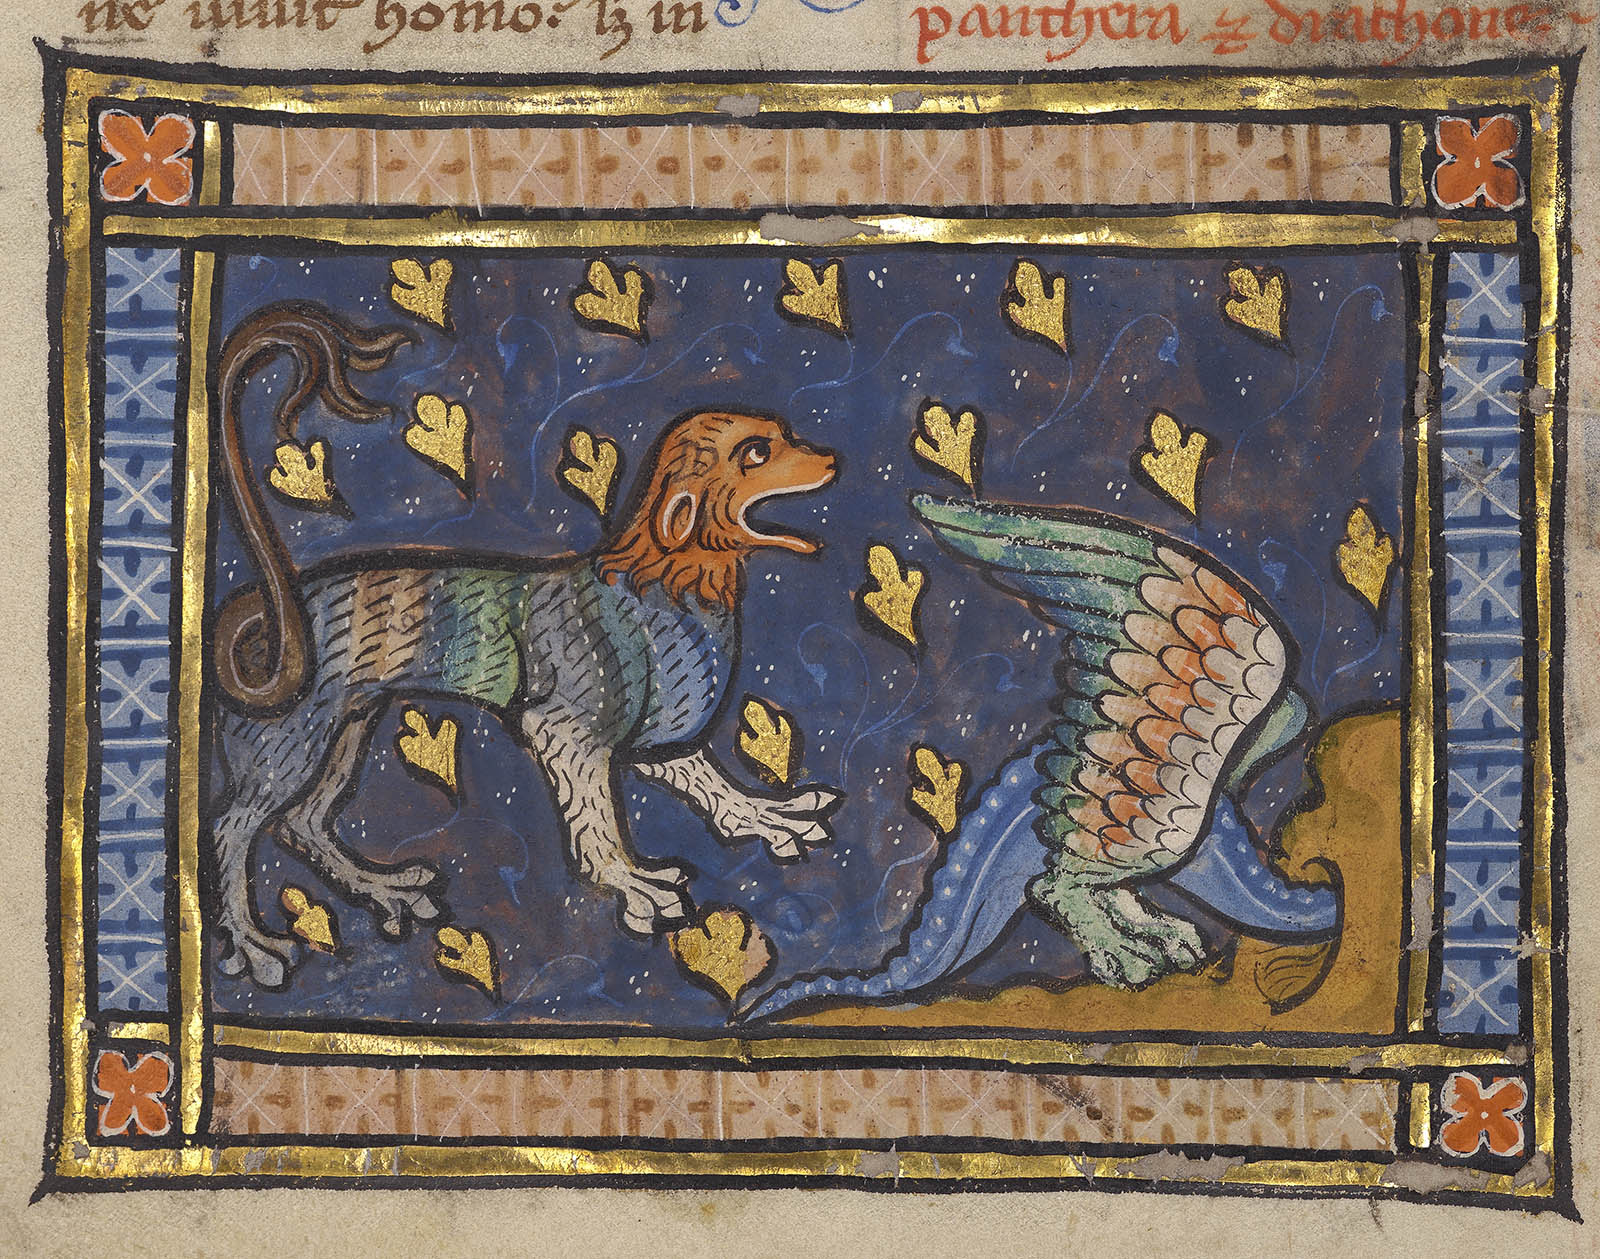 The Panther, Alpha and Omega of the Medieval Bestiary